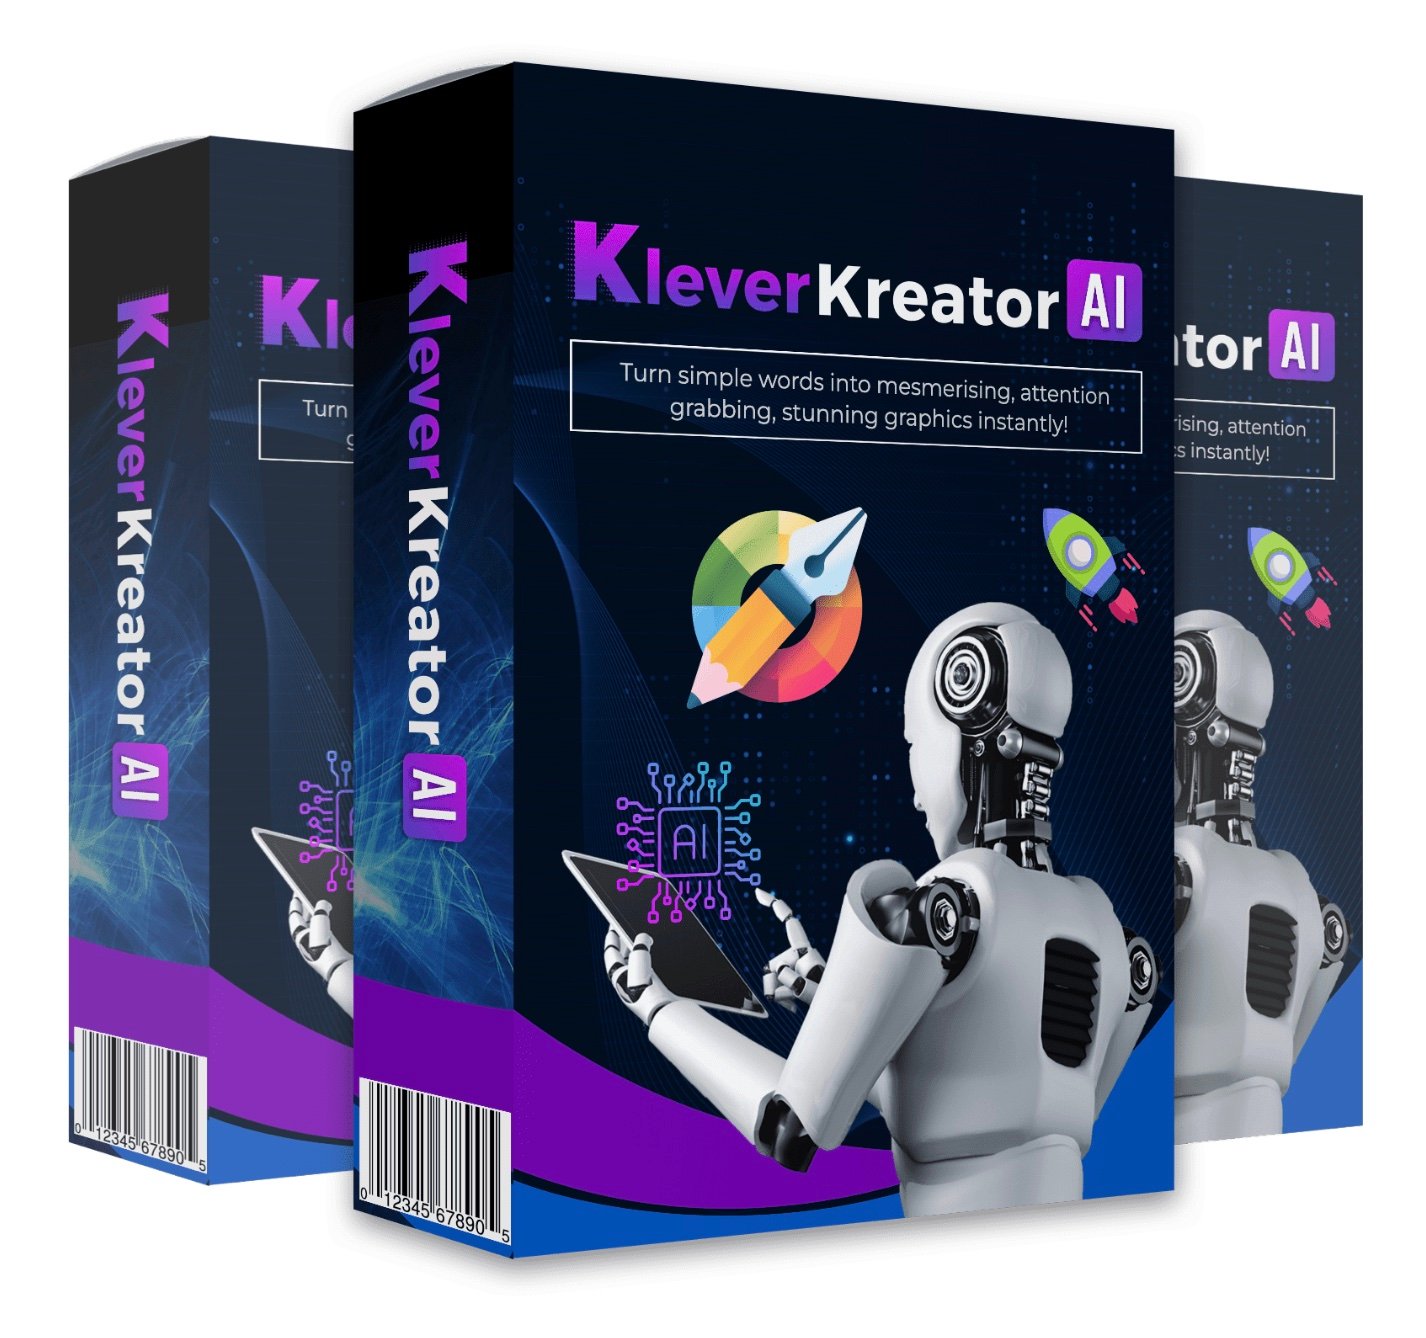 KleverKreator AI Review - The Best AI App Creating Graphics, Digital Arts, Marketing Assets And Much More In 3 Easy Steps!